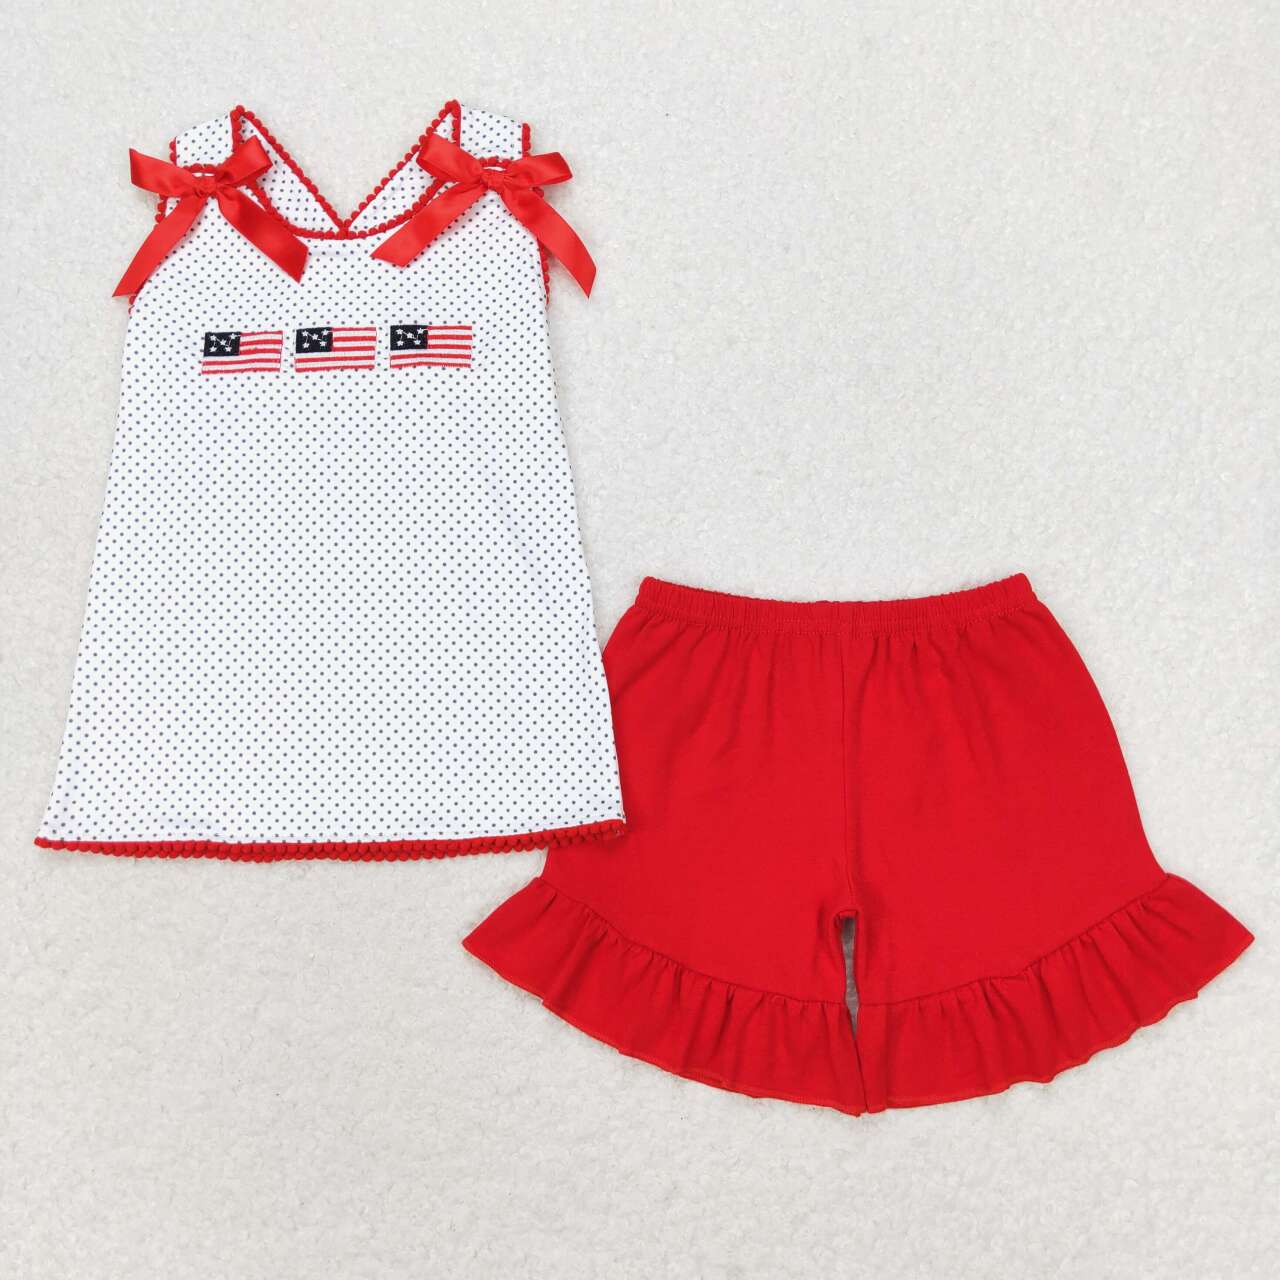 GSSO1414 Baby Girls July 4th USA Flag Tank Top Ruffle Shoets Set